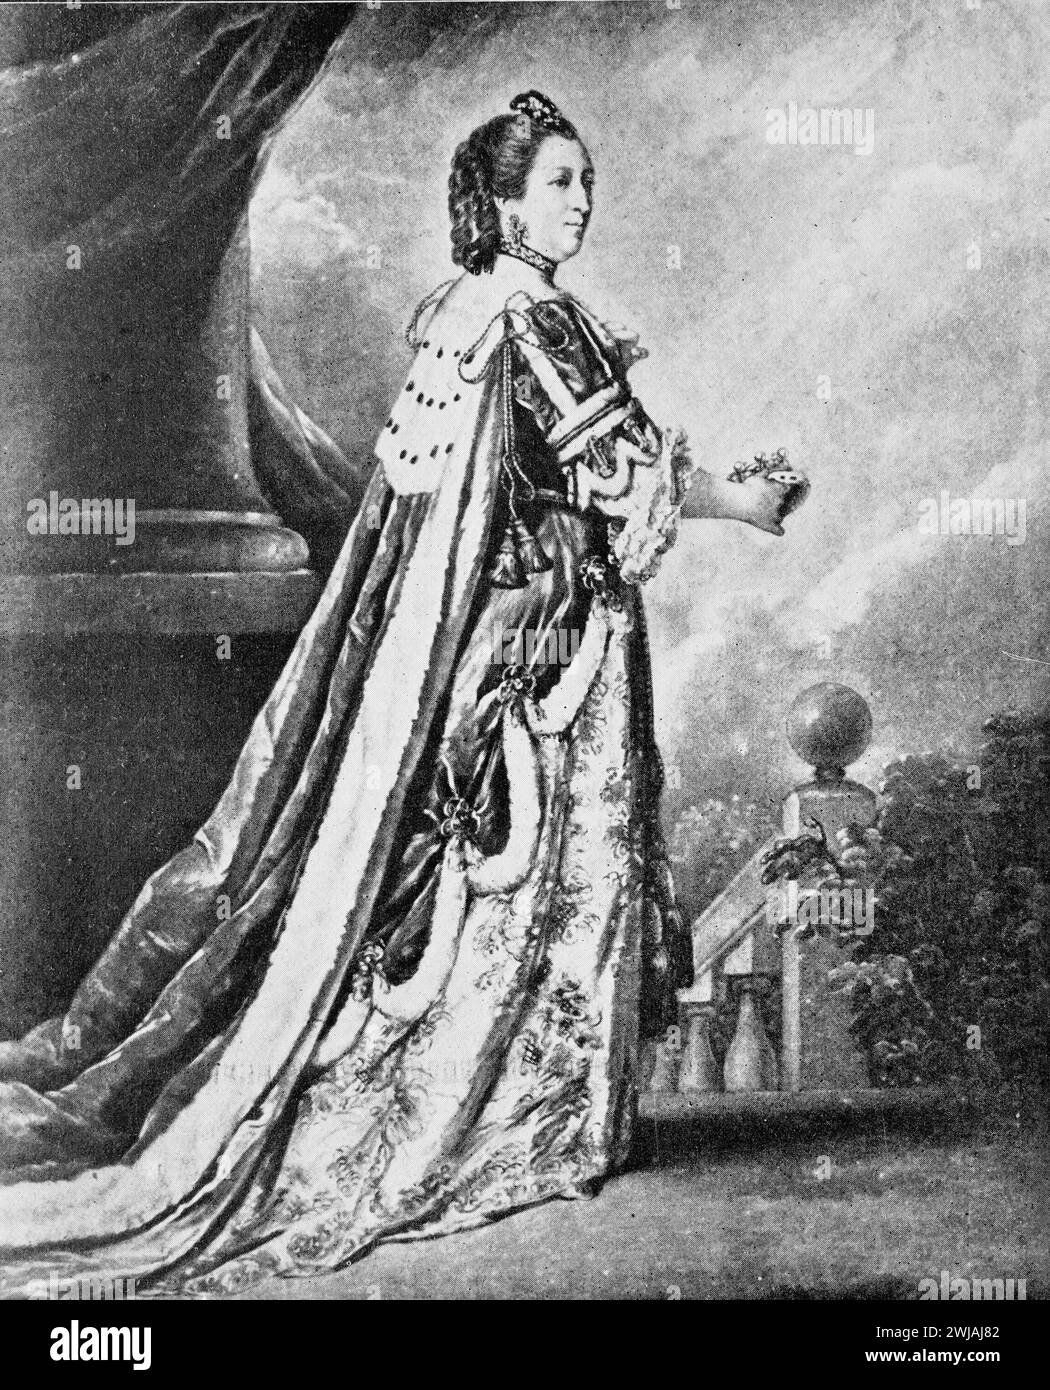 Elizabeth Countess of Northumberland after a painting by Joshua Reynolds. Black and White Illustration from the Connoisseur, an Illustrated Magazine for Collectors Voll 3 (May-Aug 1902) published in London. Stock Photo